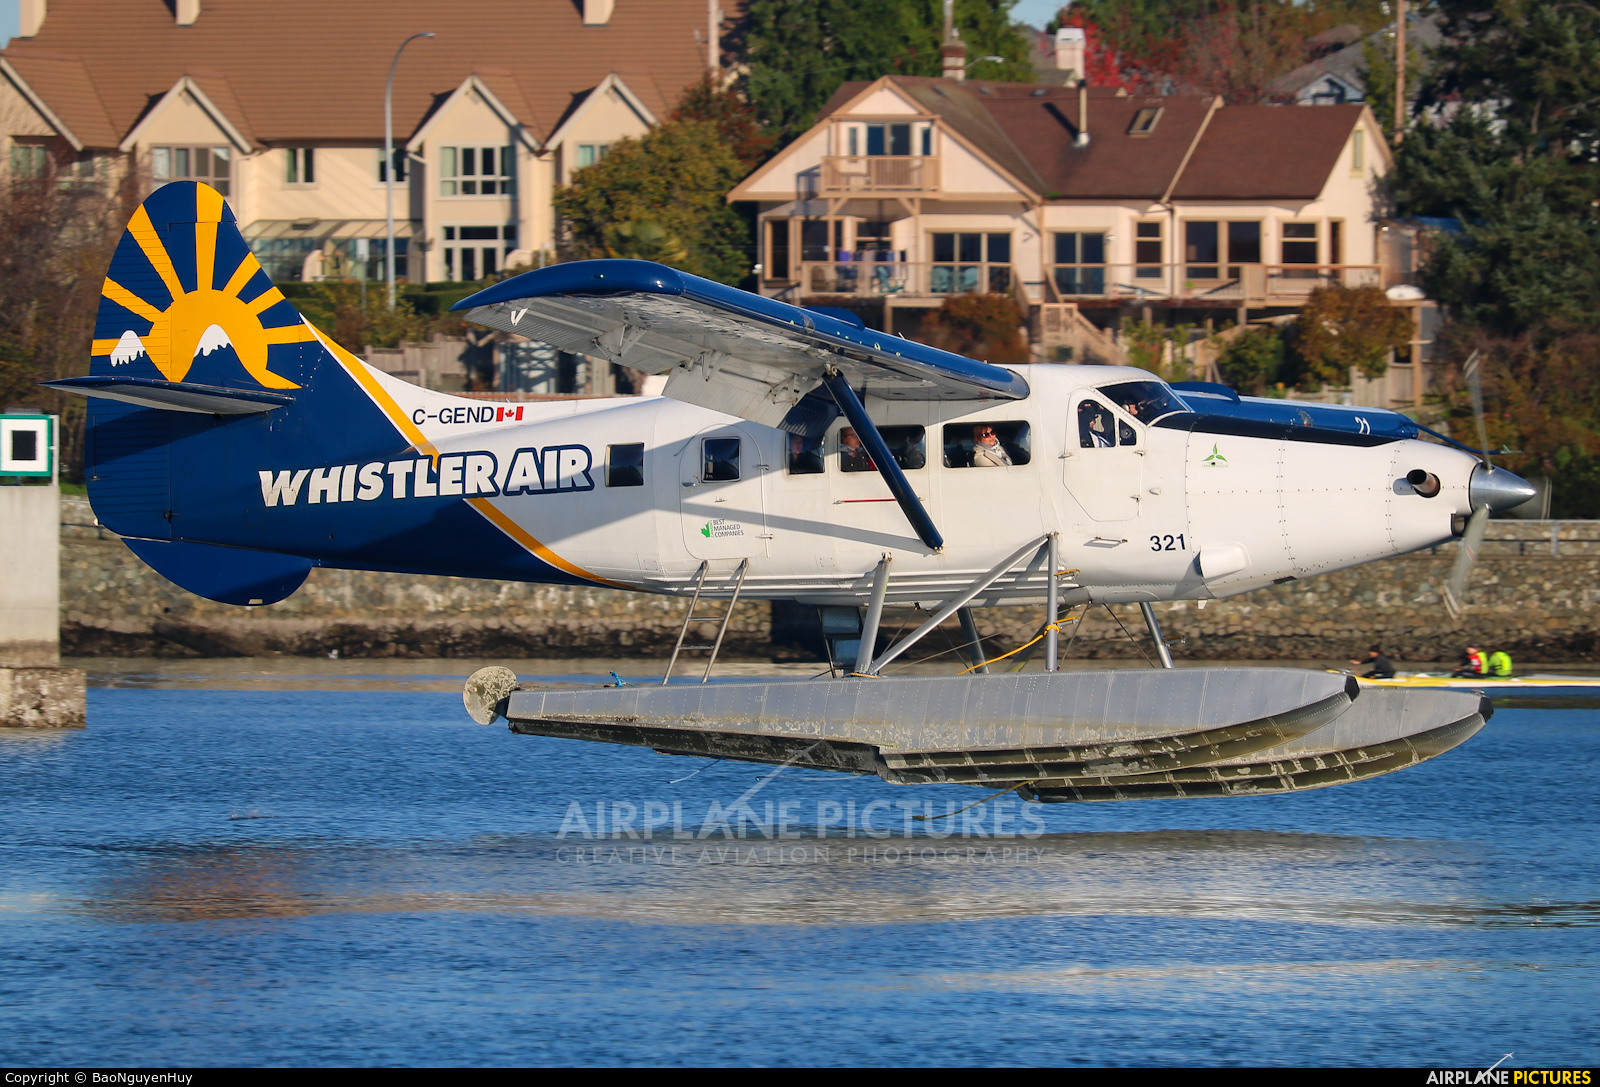 Whistler Air C-GEND aircraft at Victoria Harbour, BC